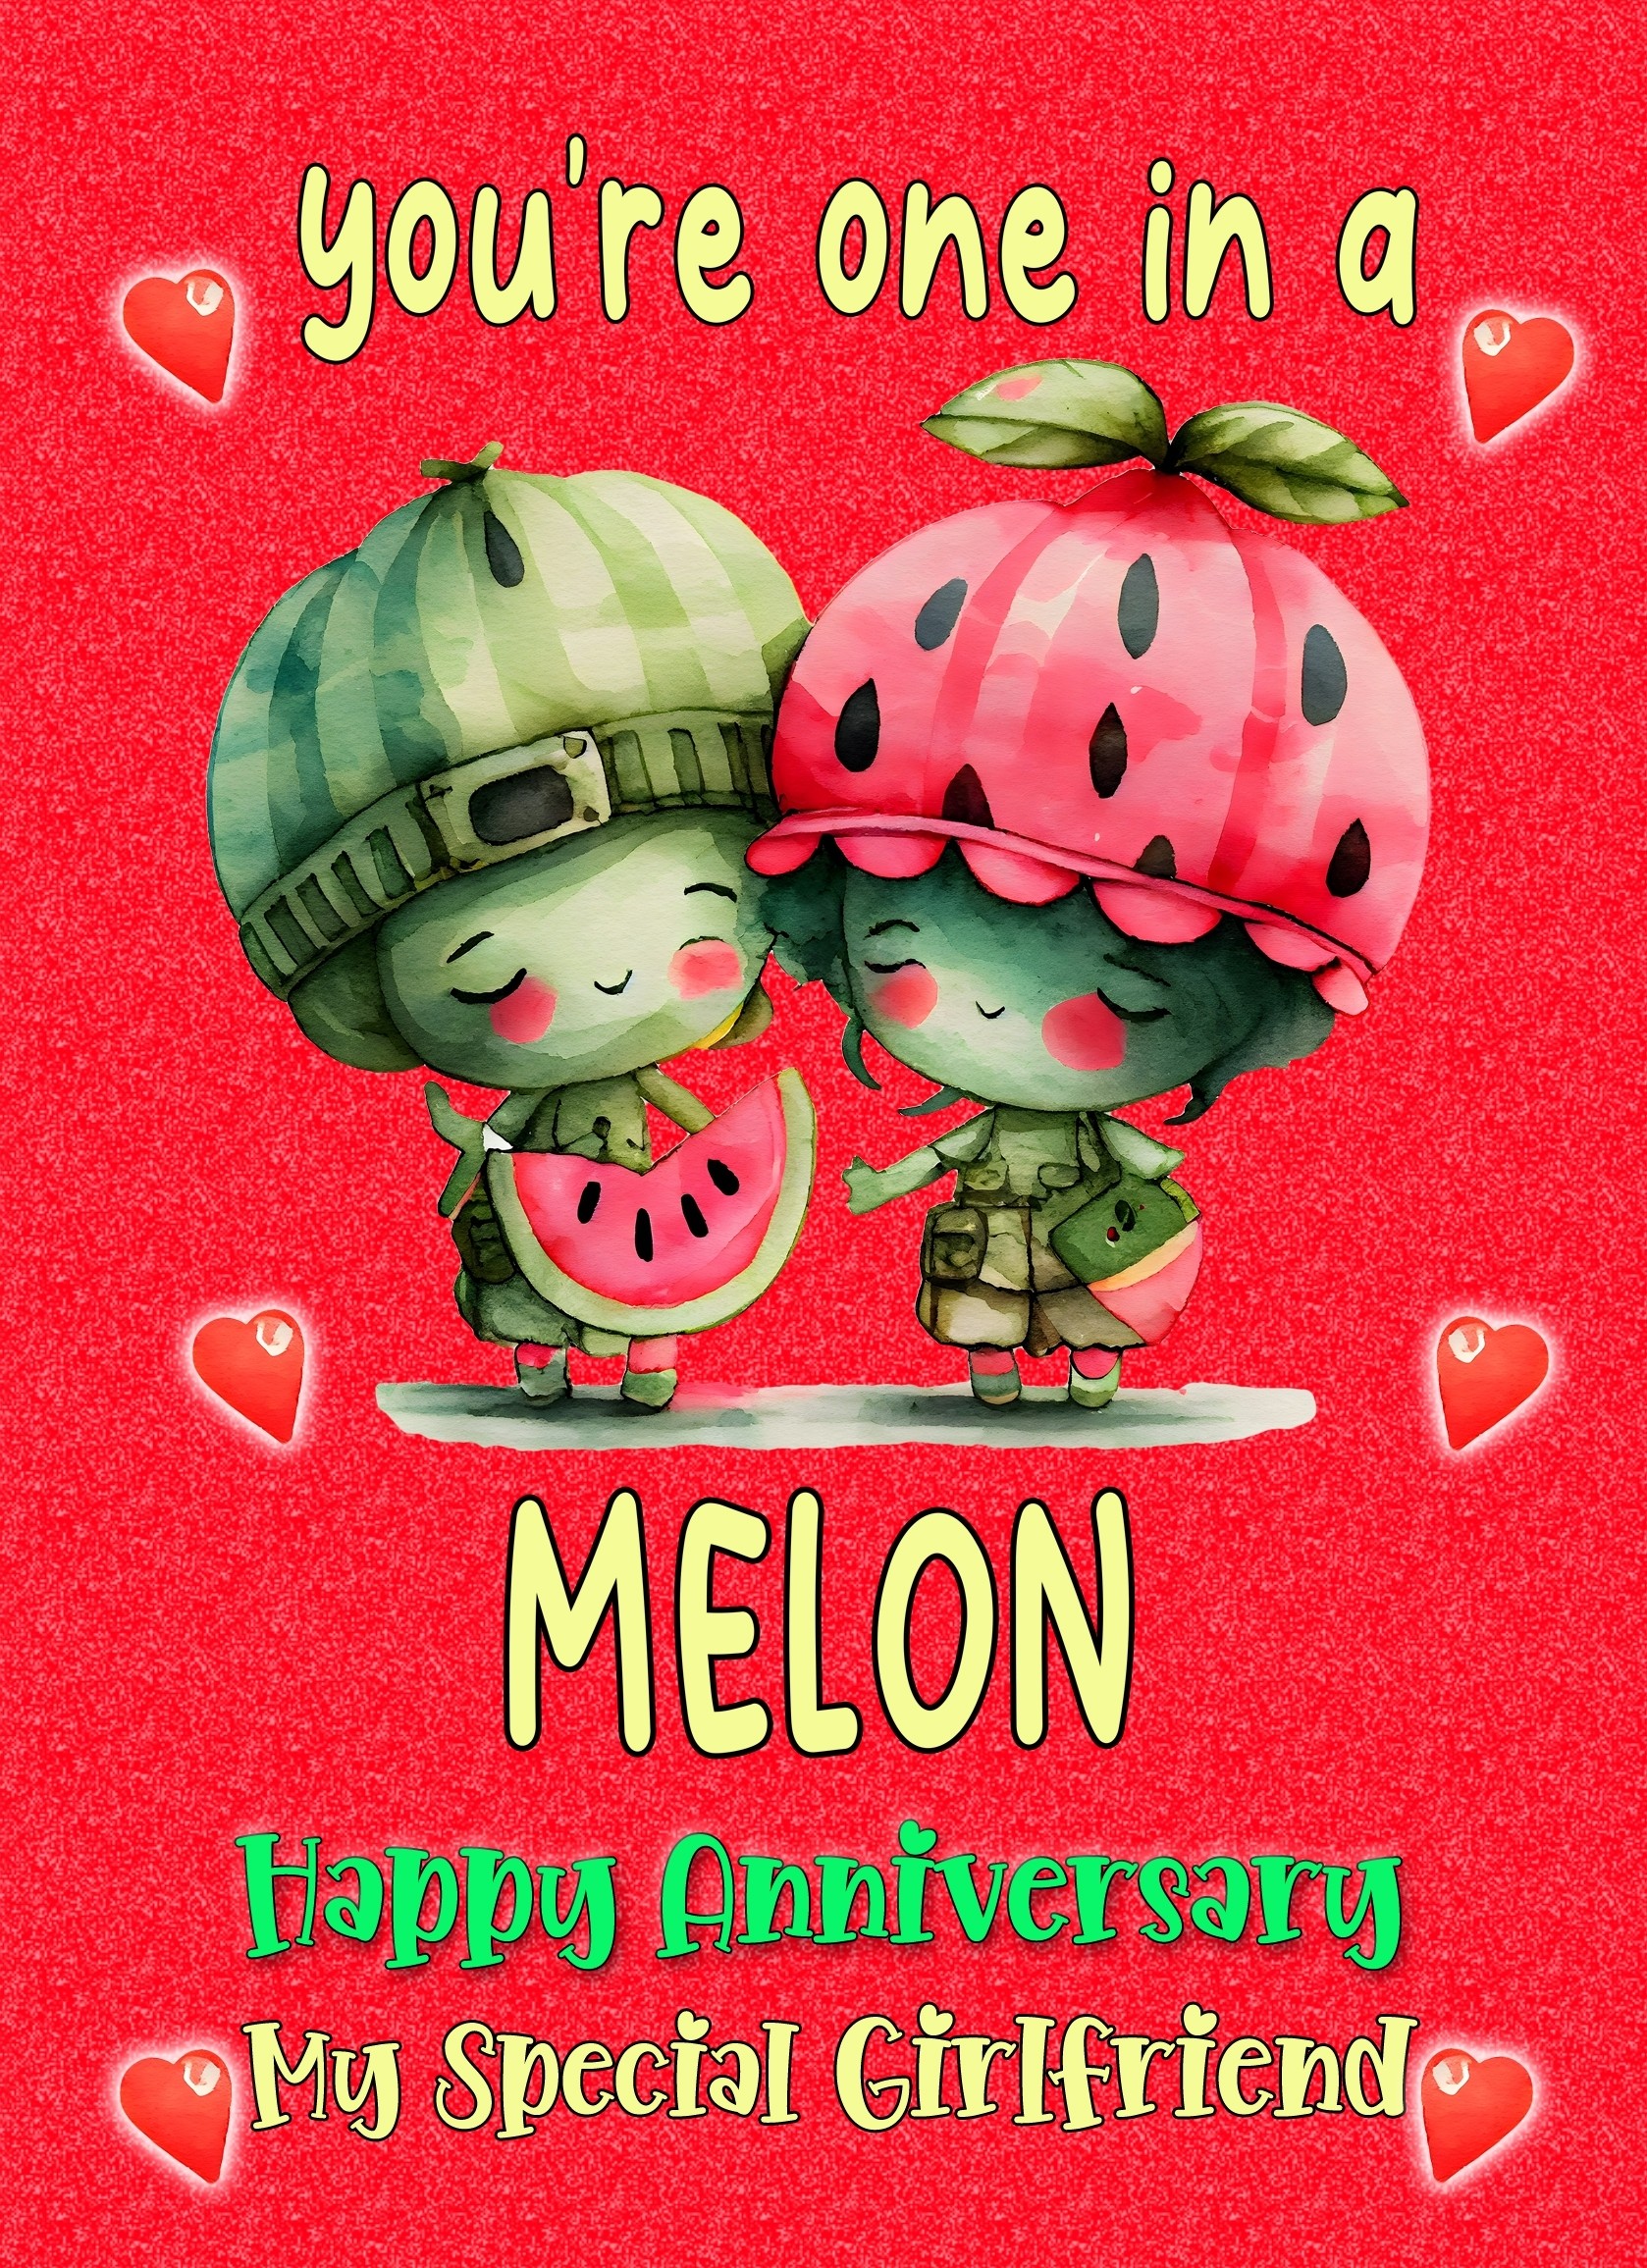 Funny Pun Romantic Anniversary Card for Girlfriend (One in a Melon)